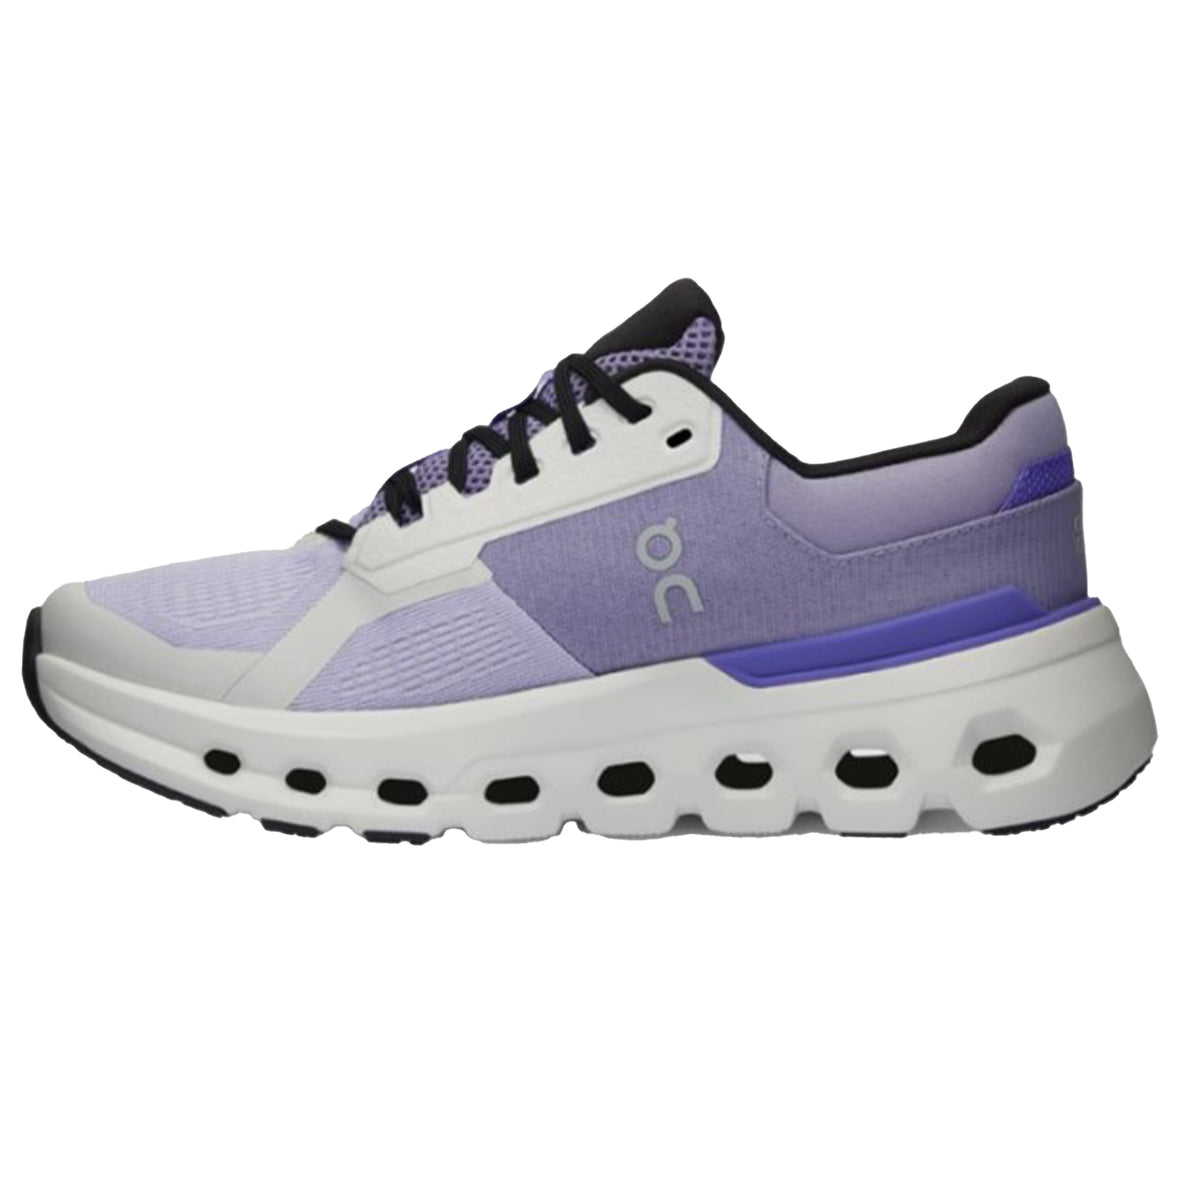 On Cloudrunner 2 Womens Running Shoes: Nimbus/Blueberry